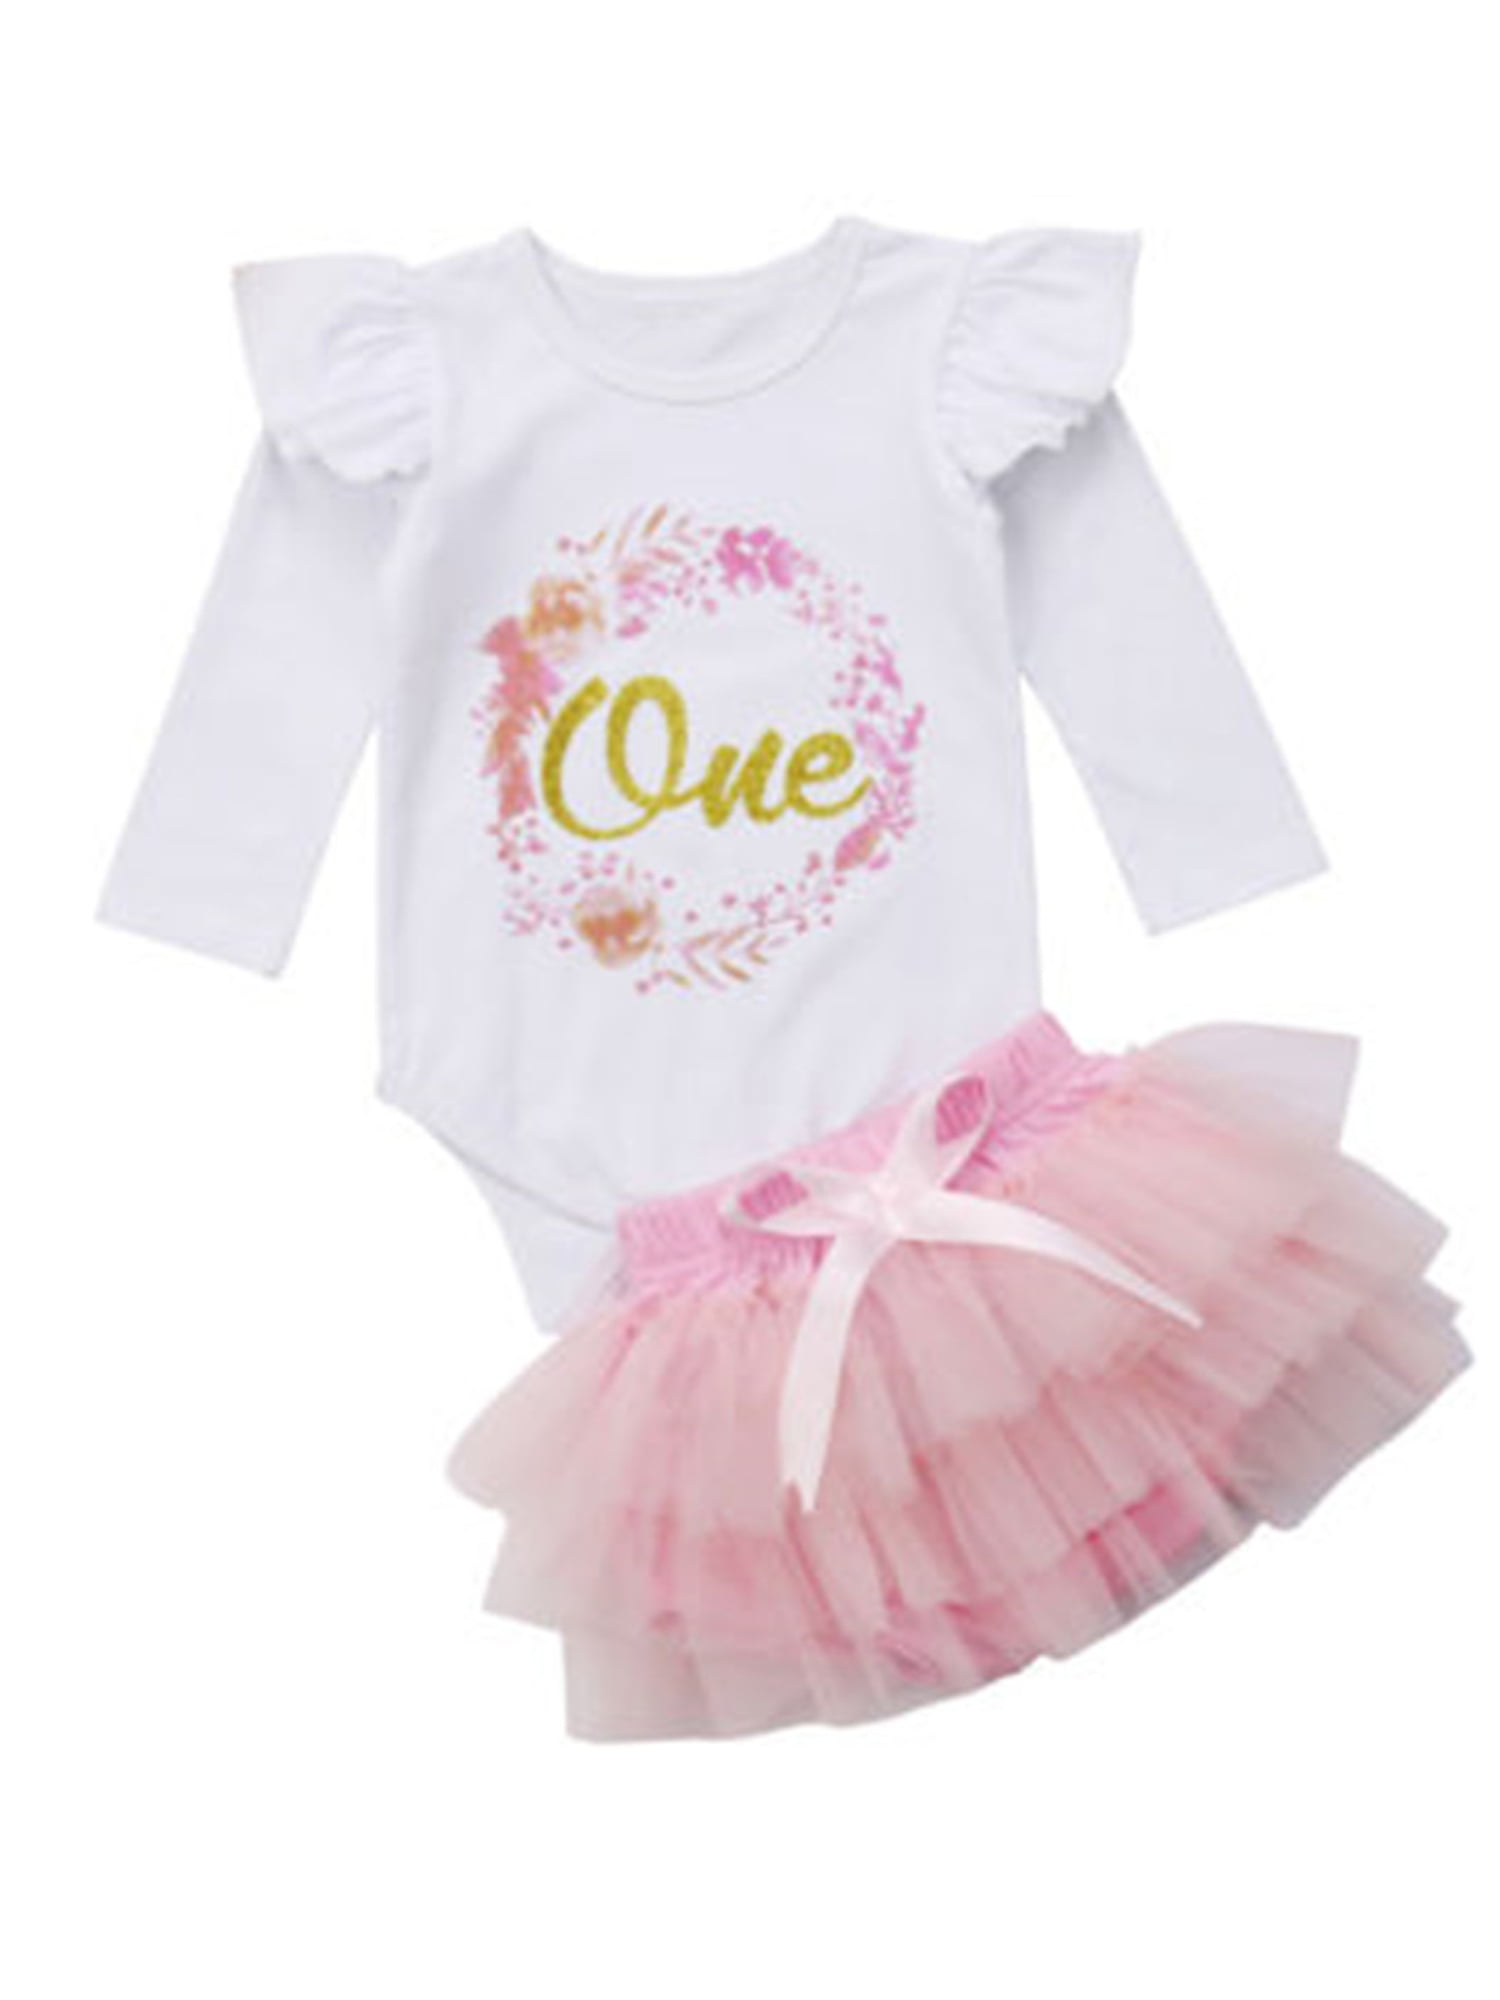 Details about   Baby Girls Outfit Cute Long Sleeve Shirt Tutu Skirt Infant Casual Comfy Sets 